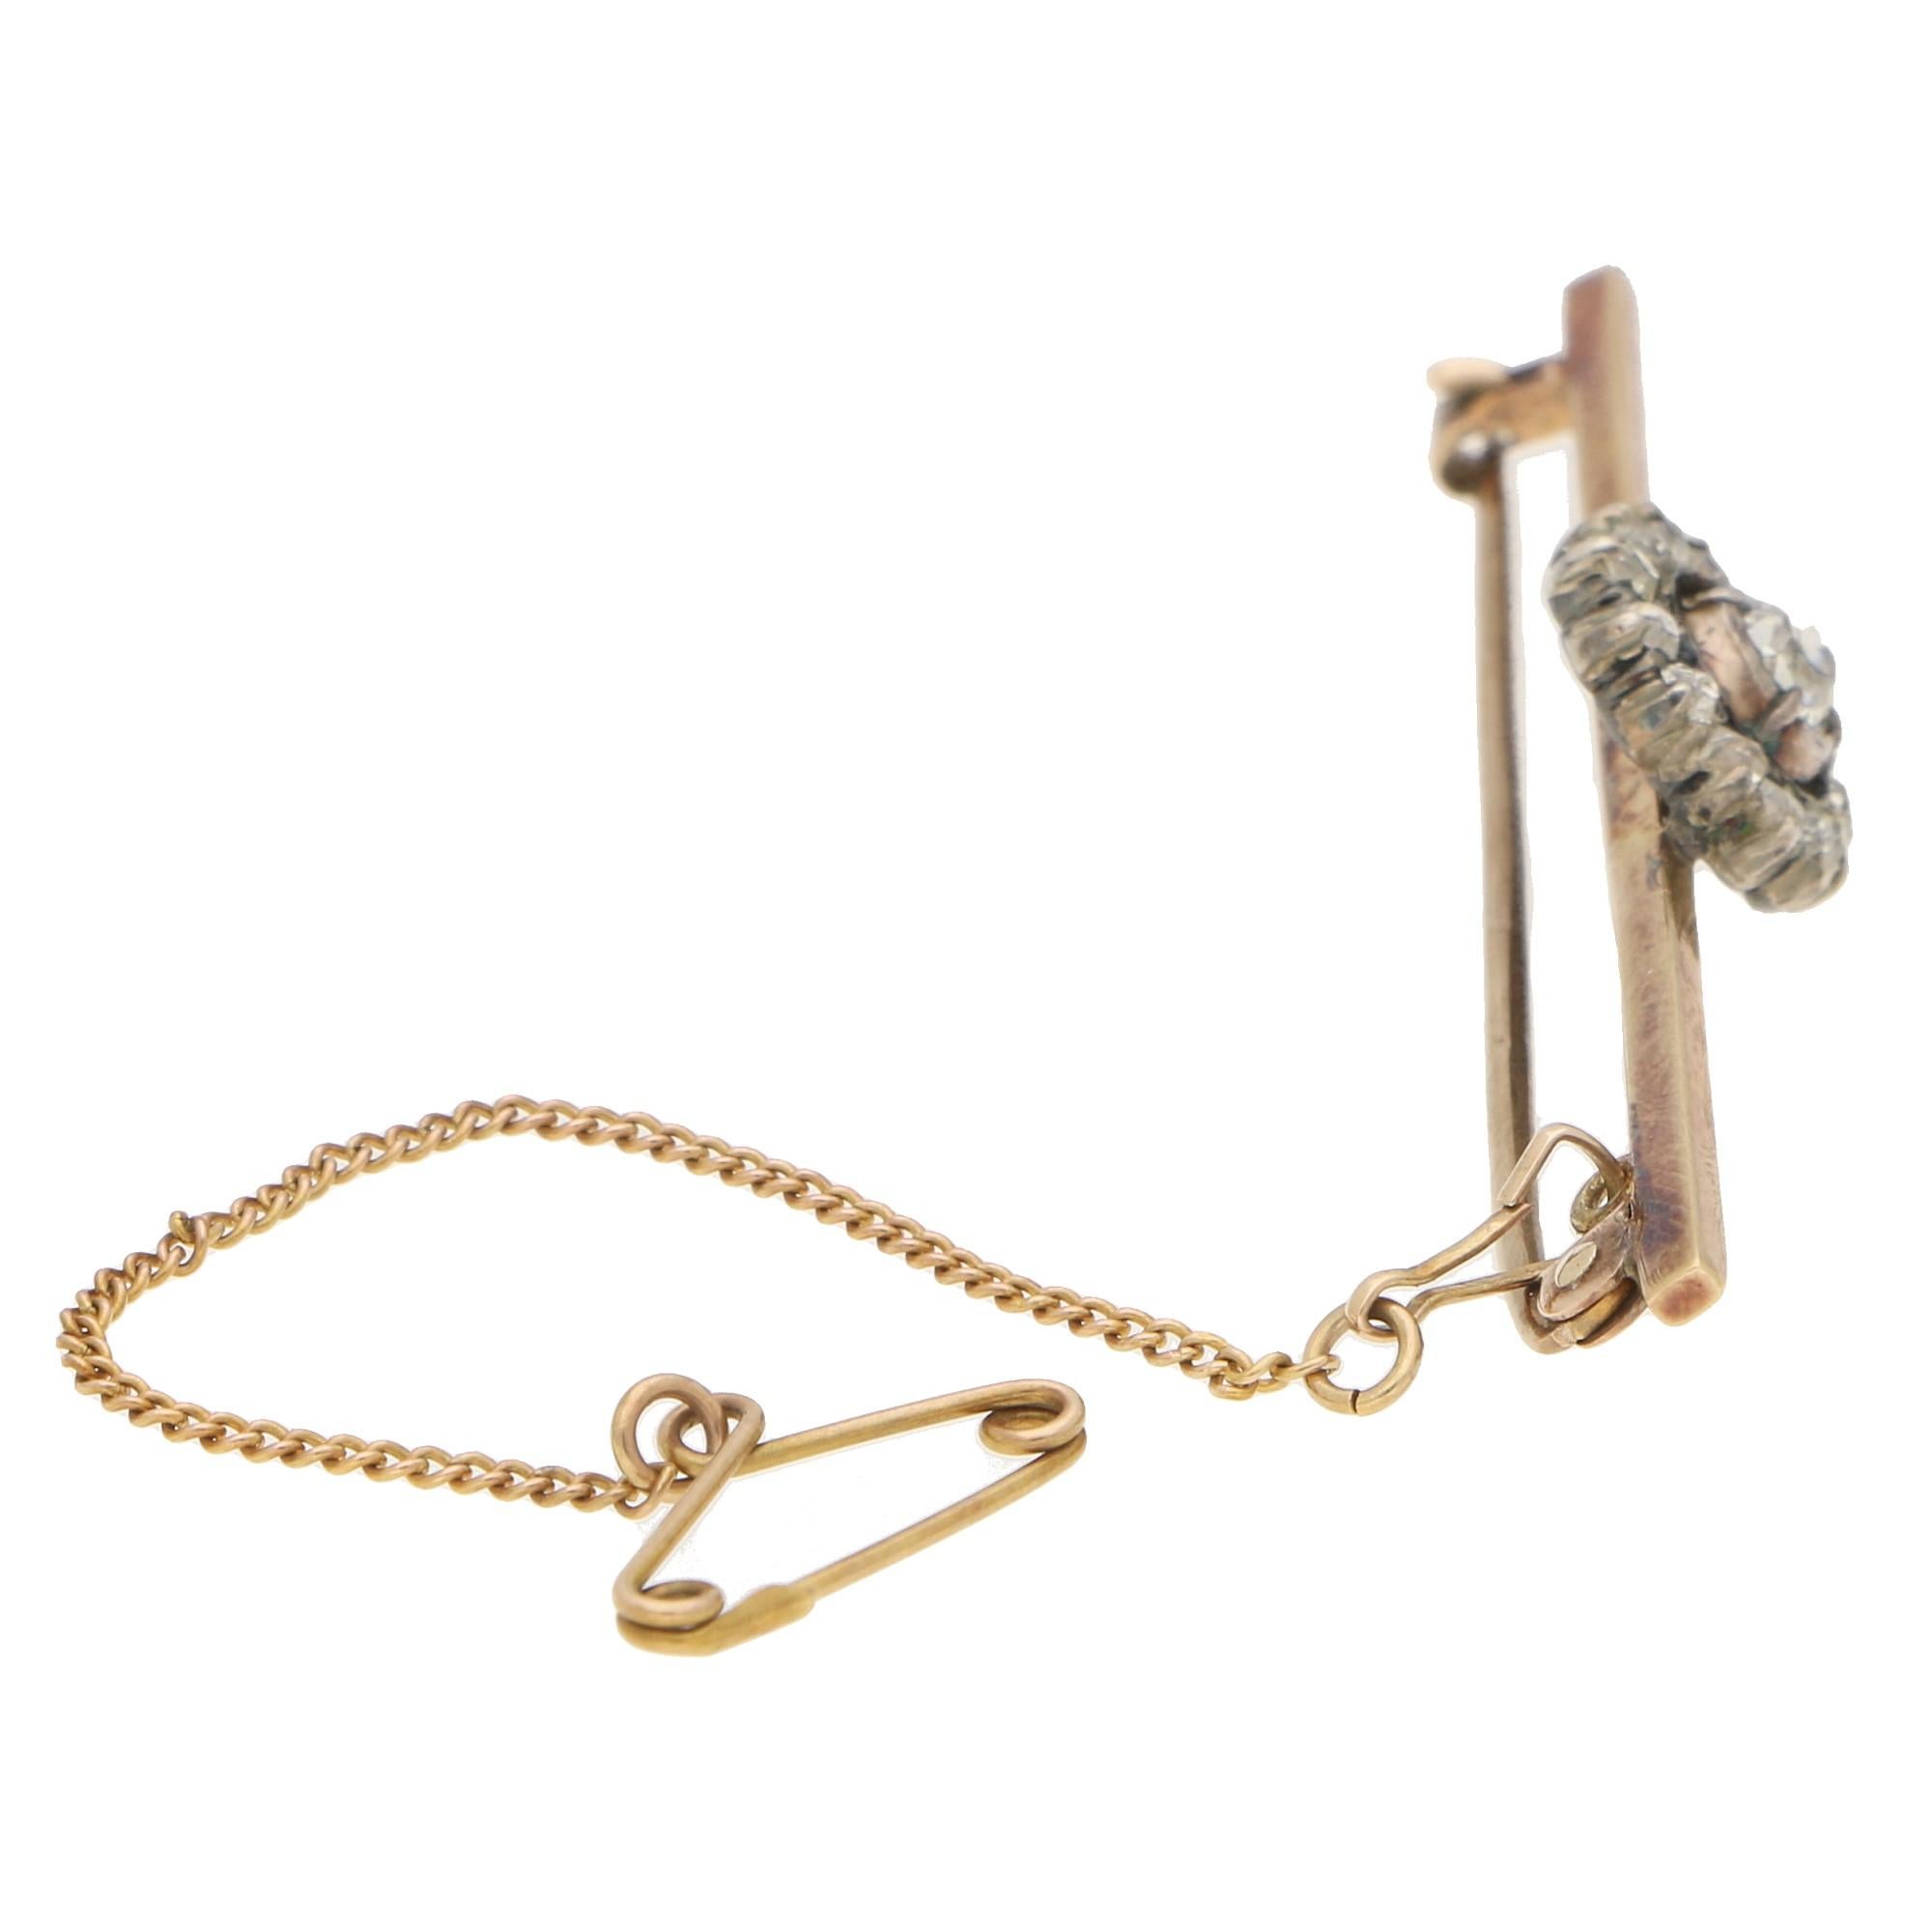 A beautiful Victorian old mine cut diamond bar pin brooch set in silver on gold. 

This lovely piece is predominantly set with an elegant Victorian cluster set throughout with old mine cut diamonds in the traditional 'cut away' setting. The brooch